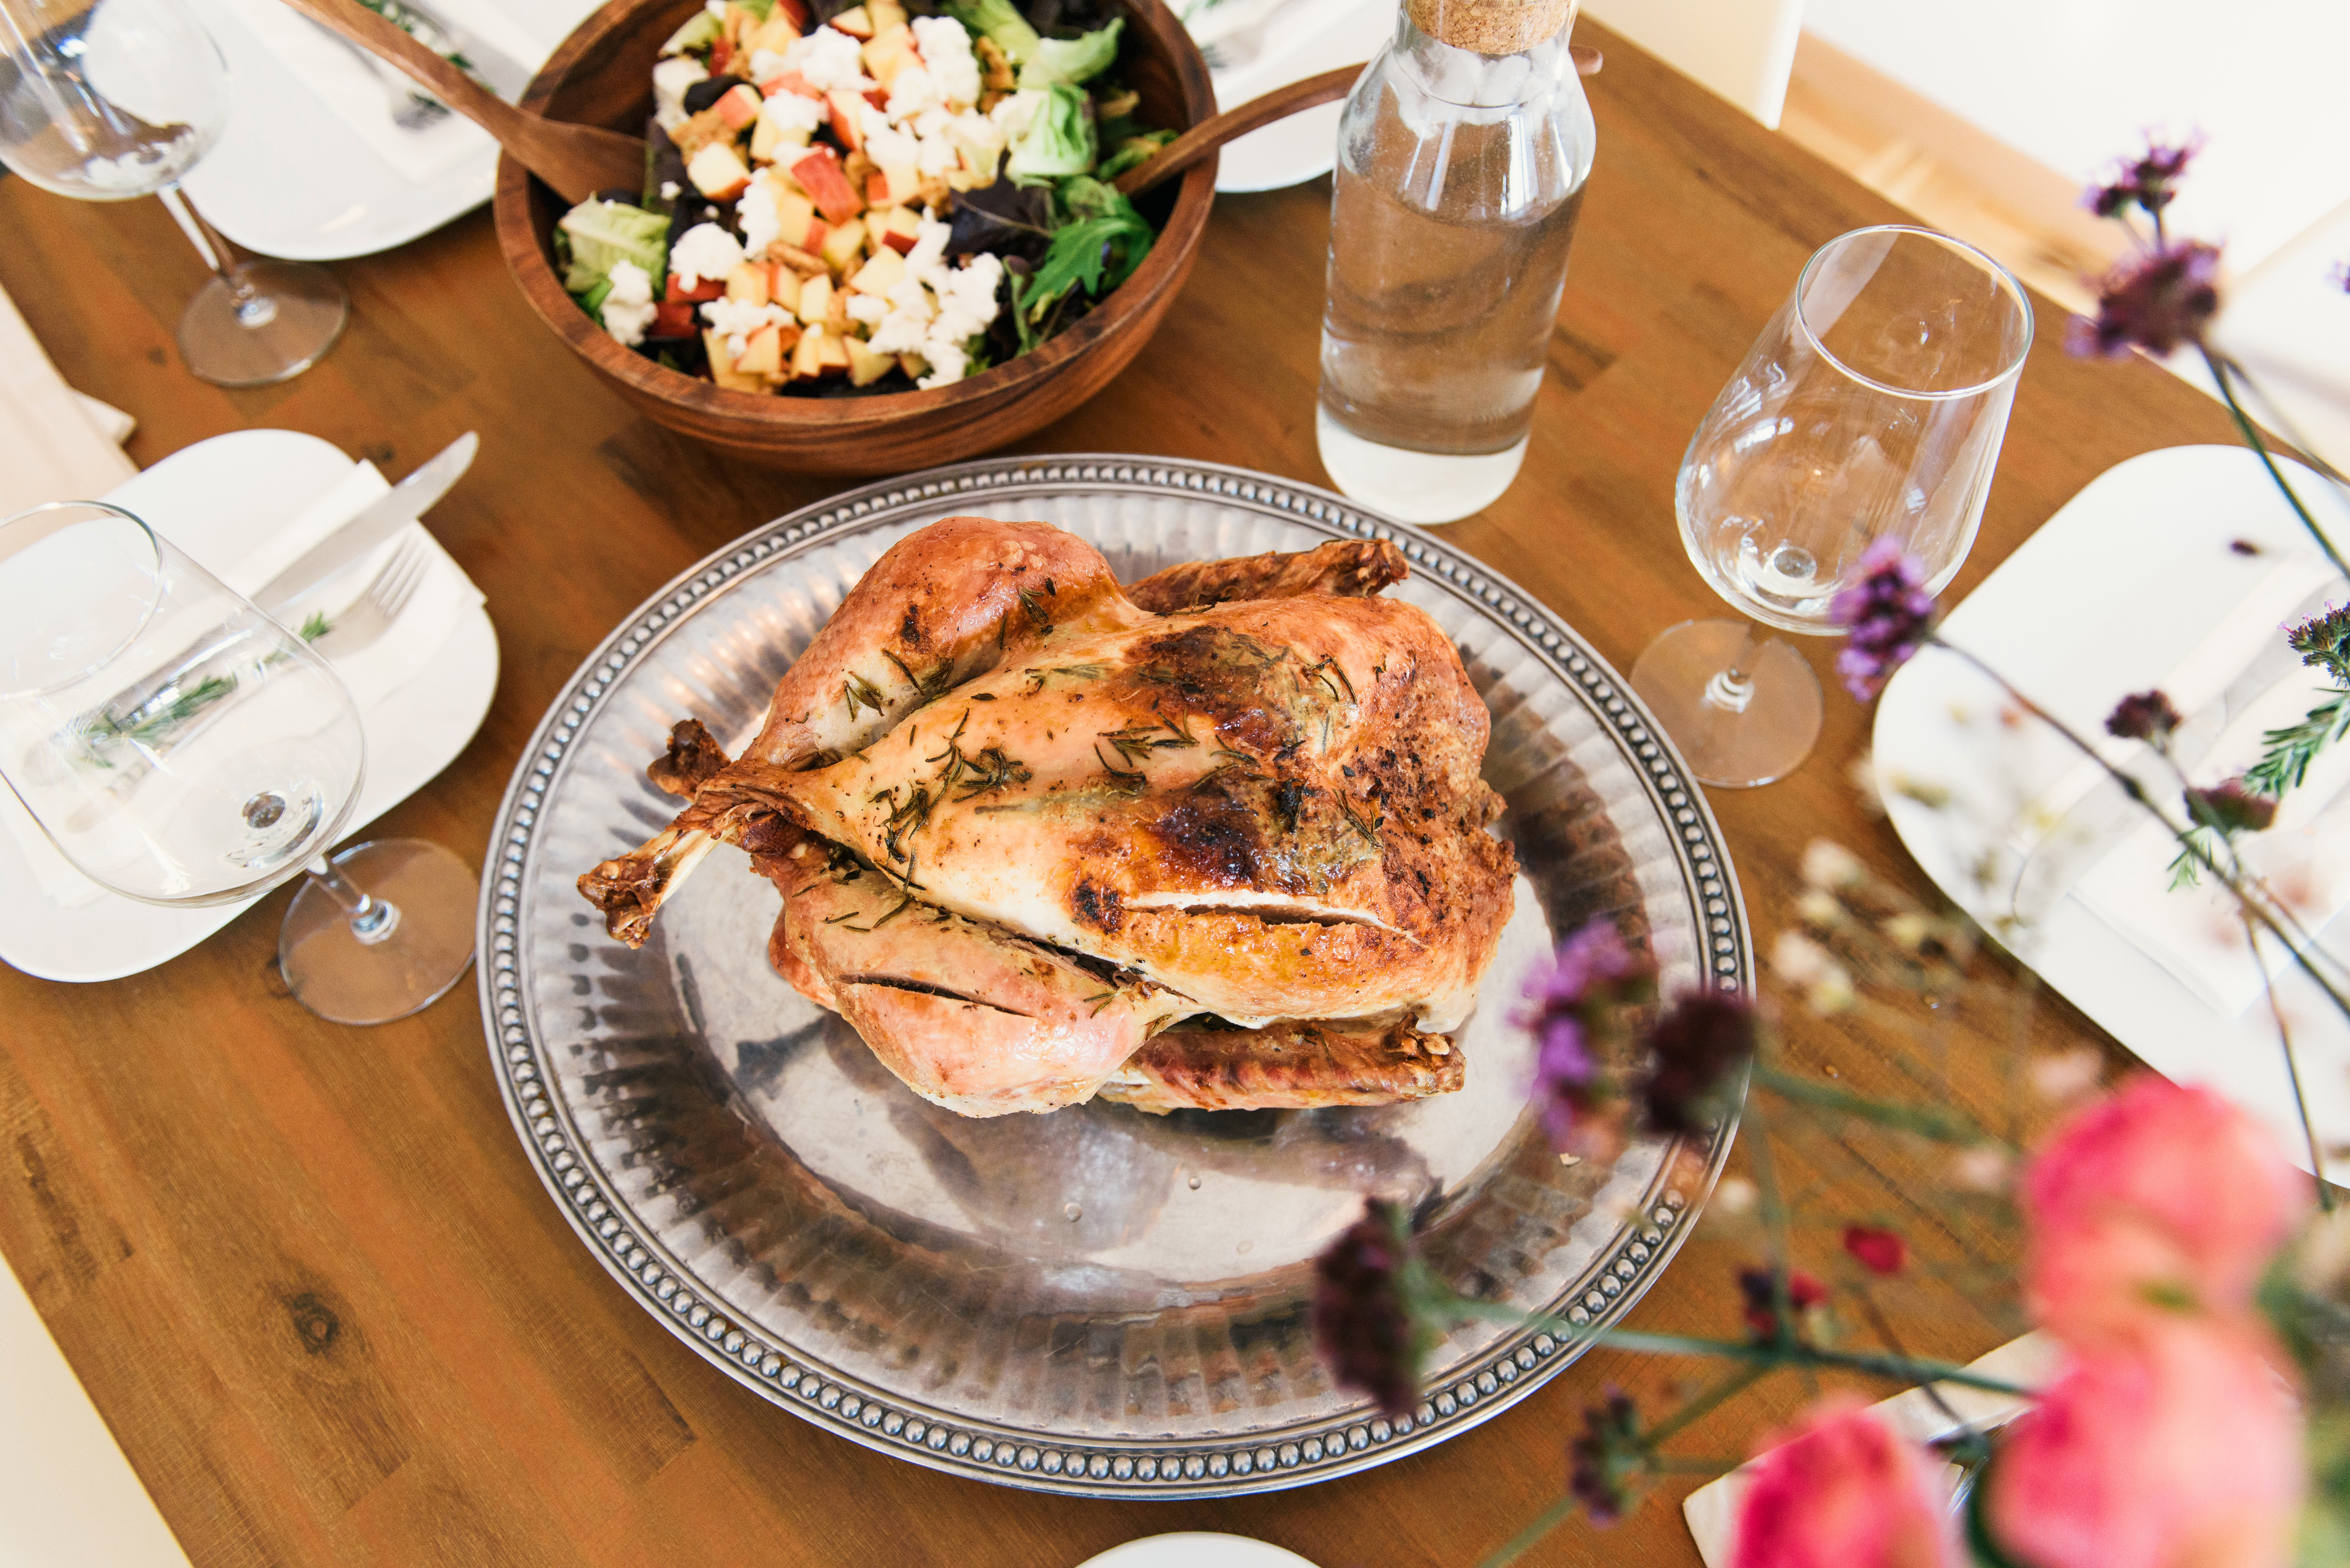 Thanksgiving Meal with Turkey image - Free stock photo - Public Domain